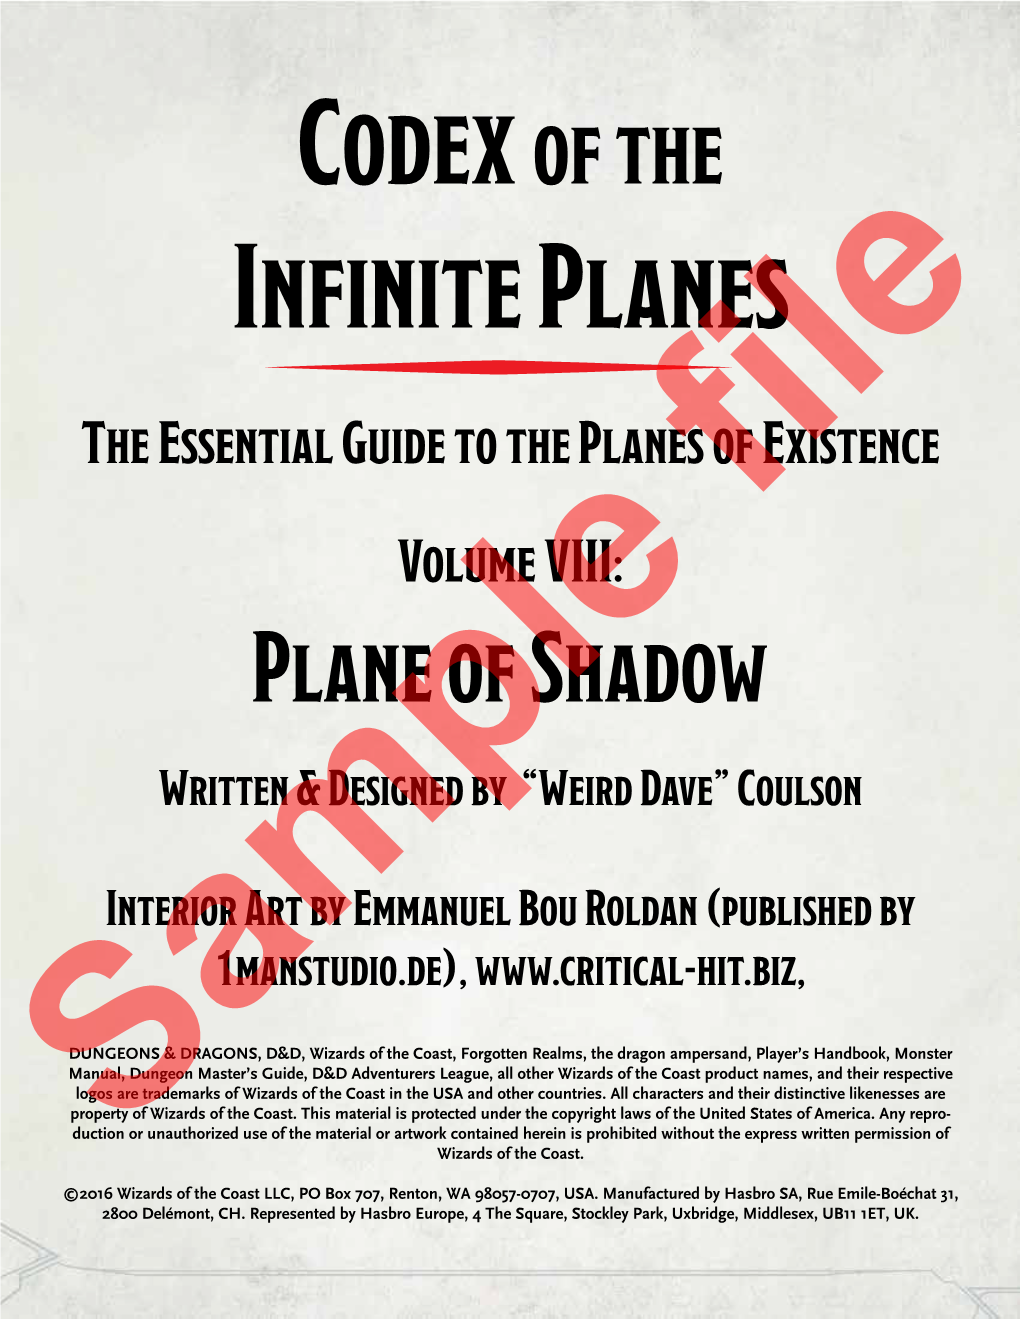 Plane of Shadow Written & Designed by “Weird Dave” Coulson